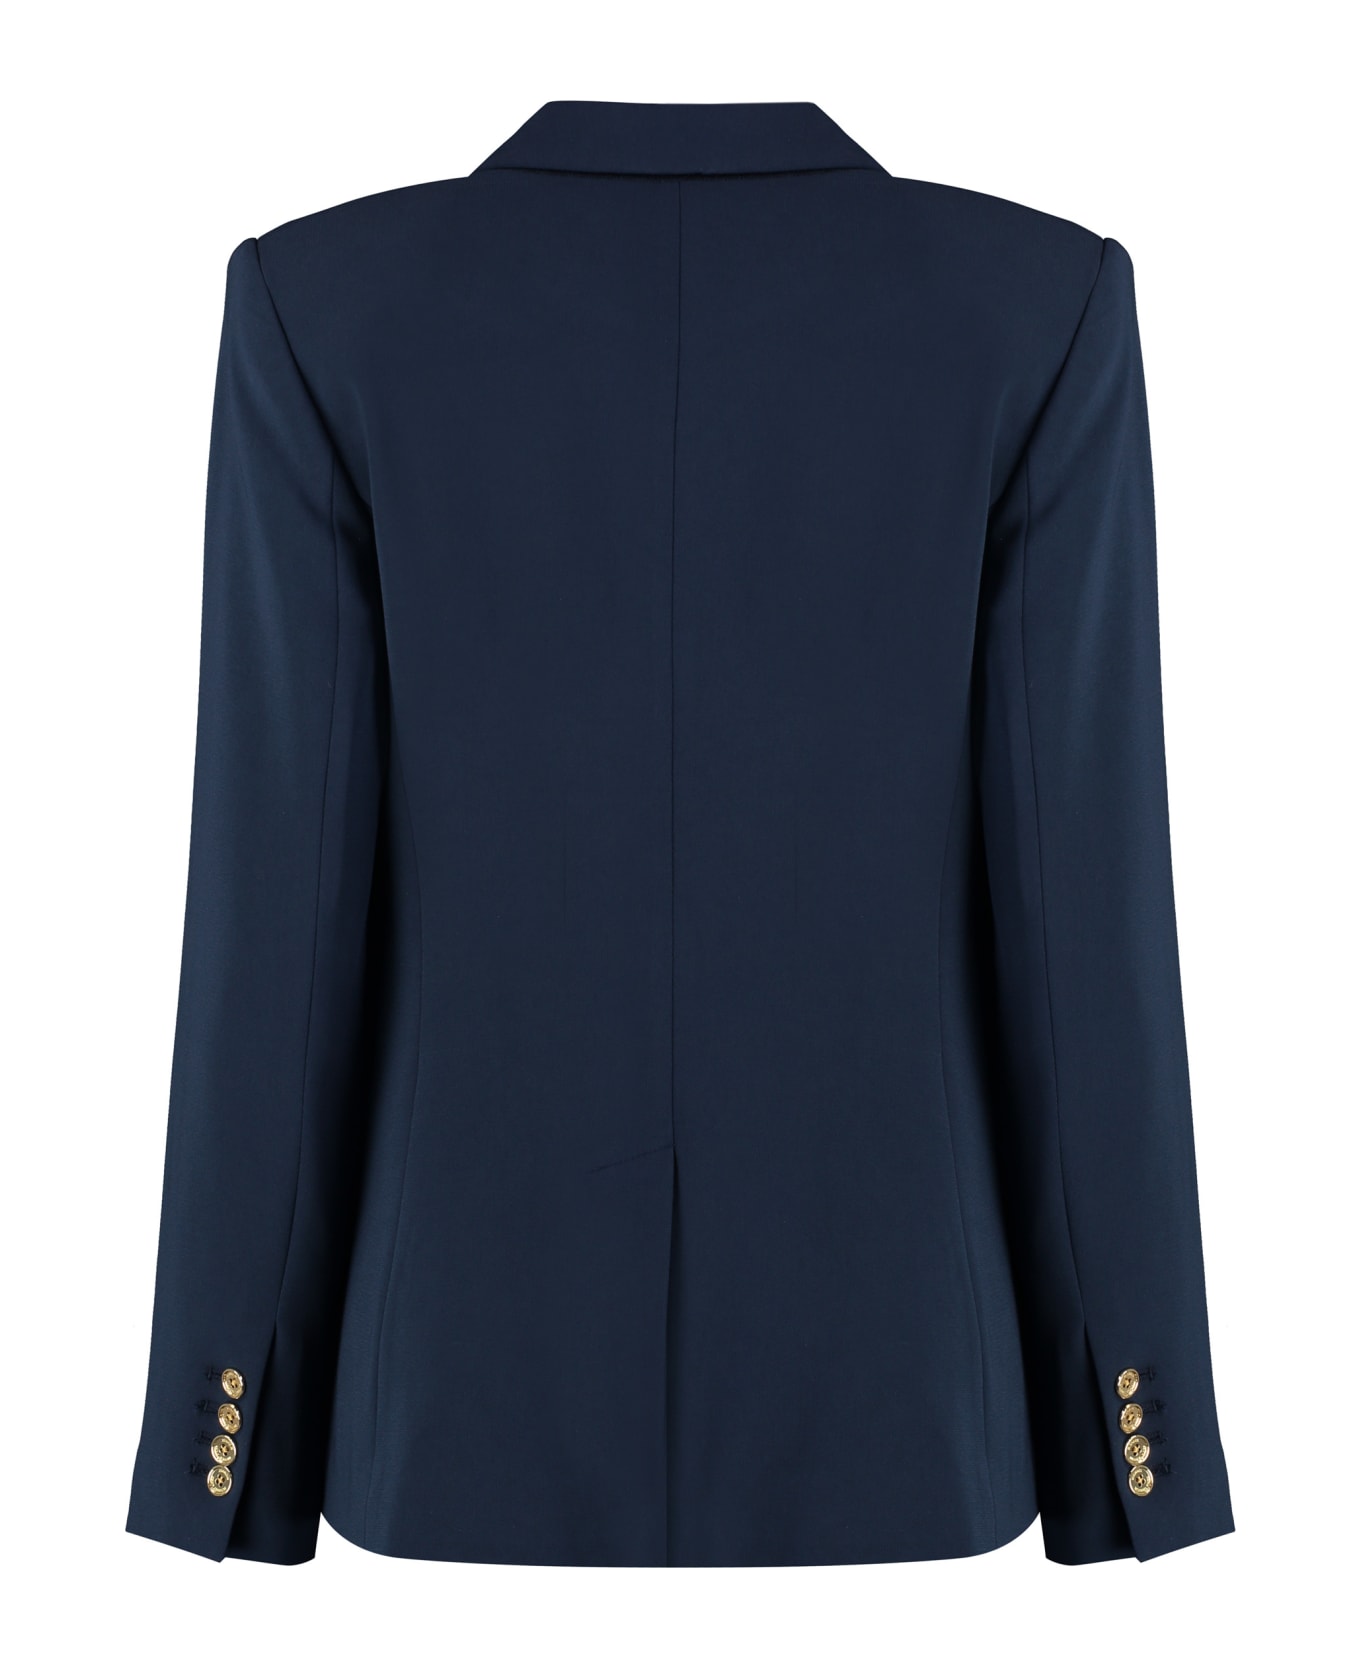 Michael Kors Single-breasted One Button Jacket - blue